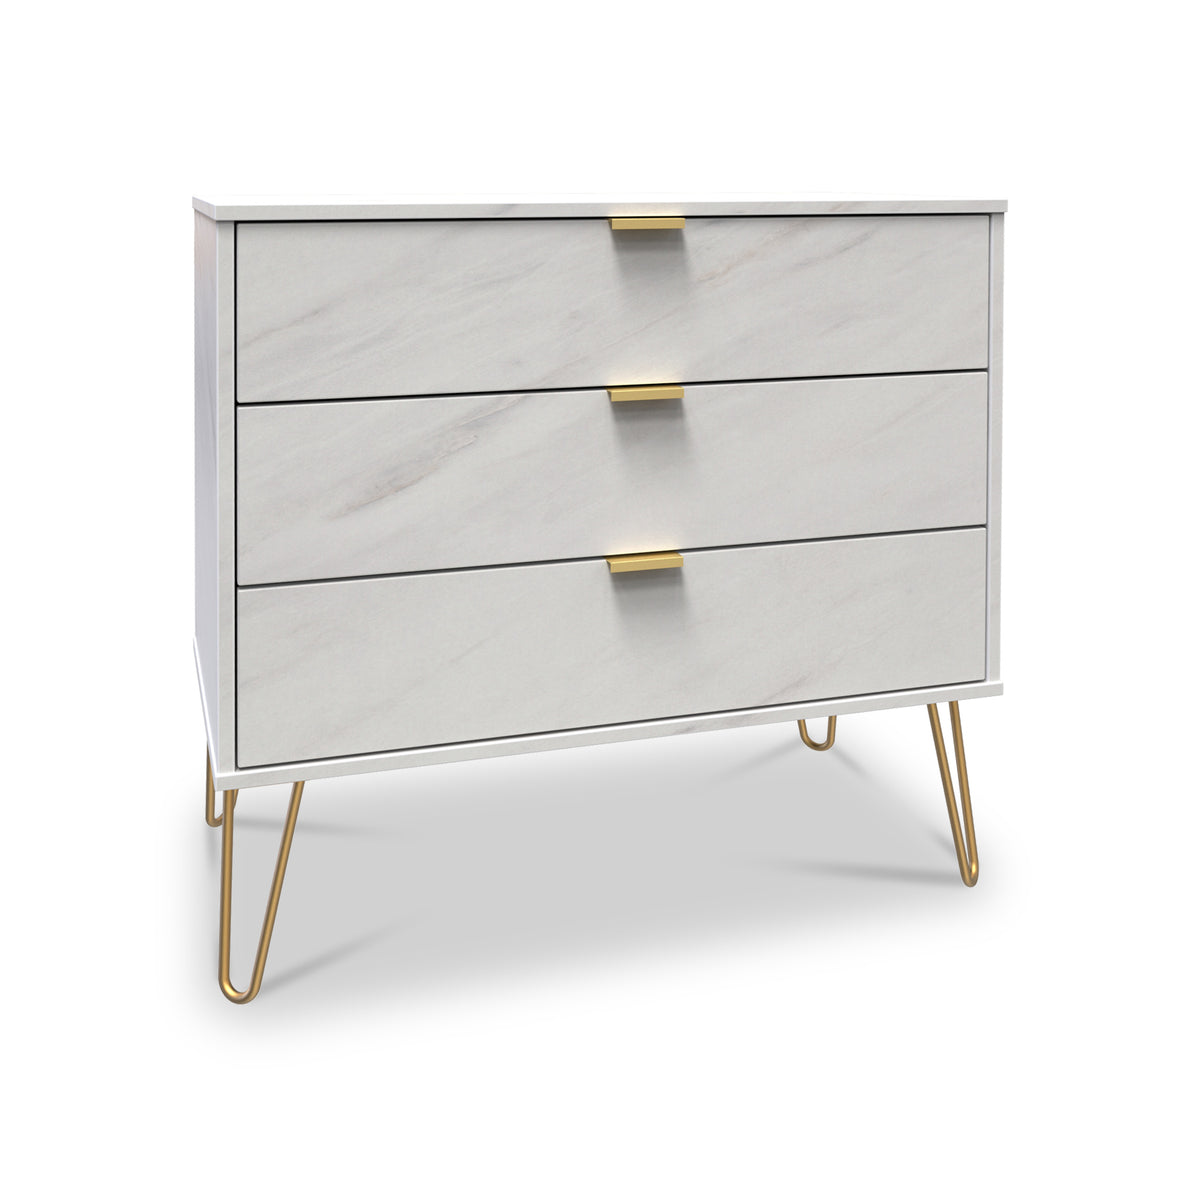 Moreno Marble Effect 3 Drawer Chest from Roseland Furniture